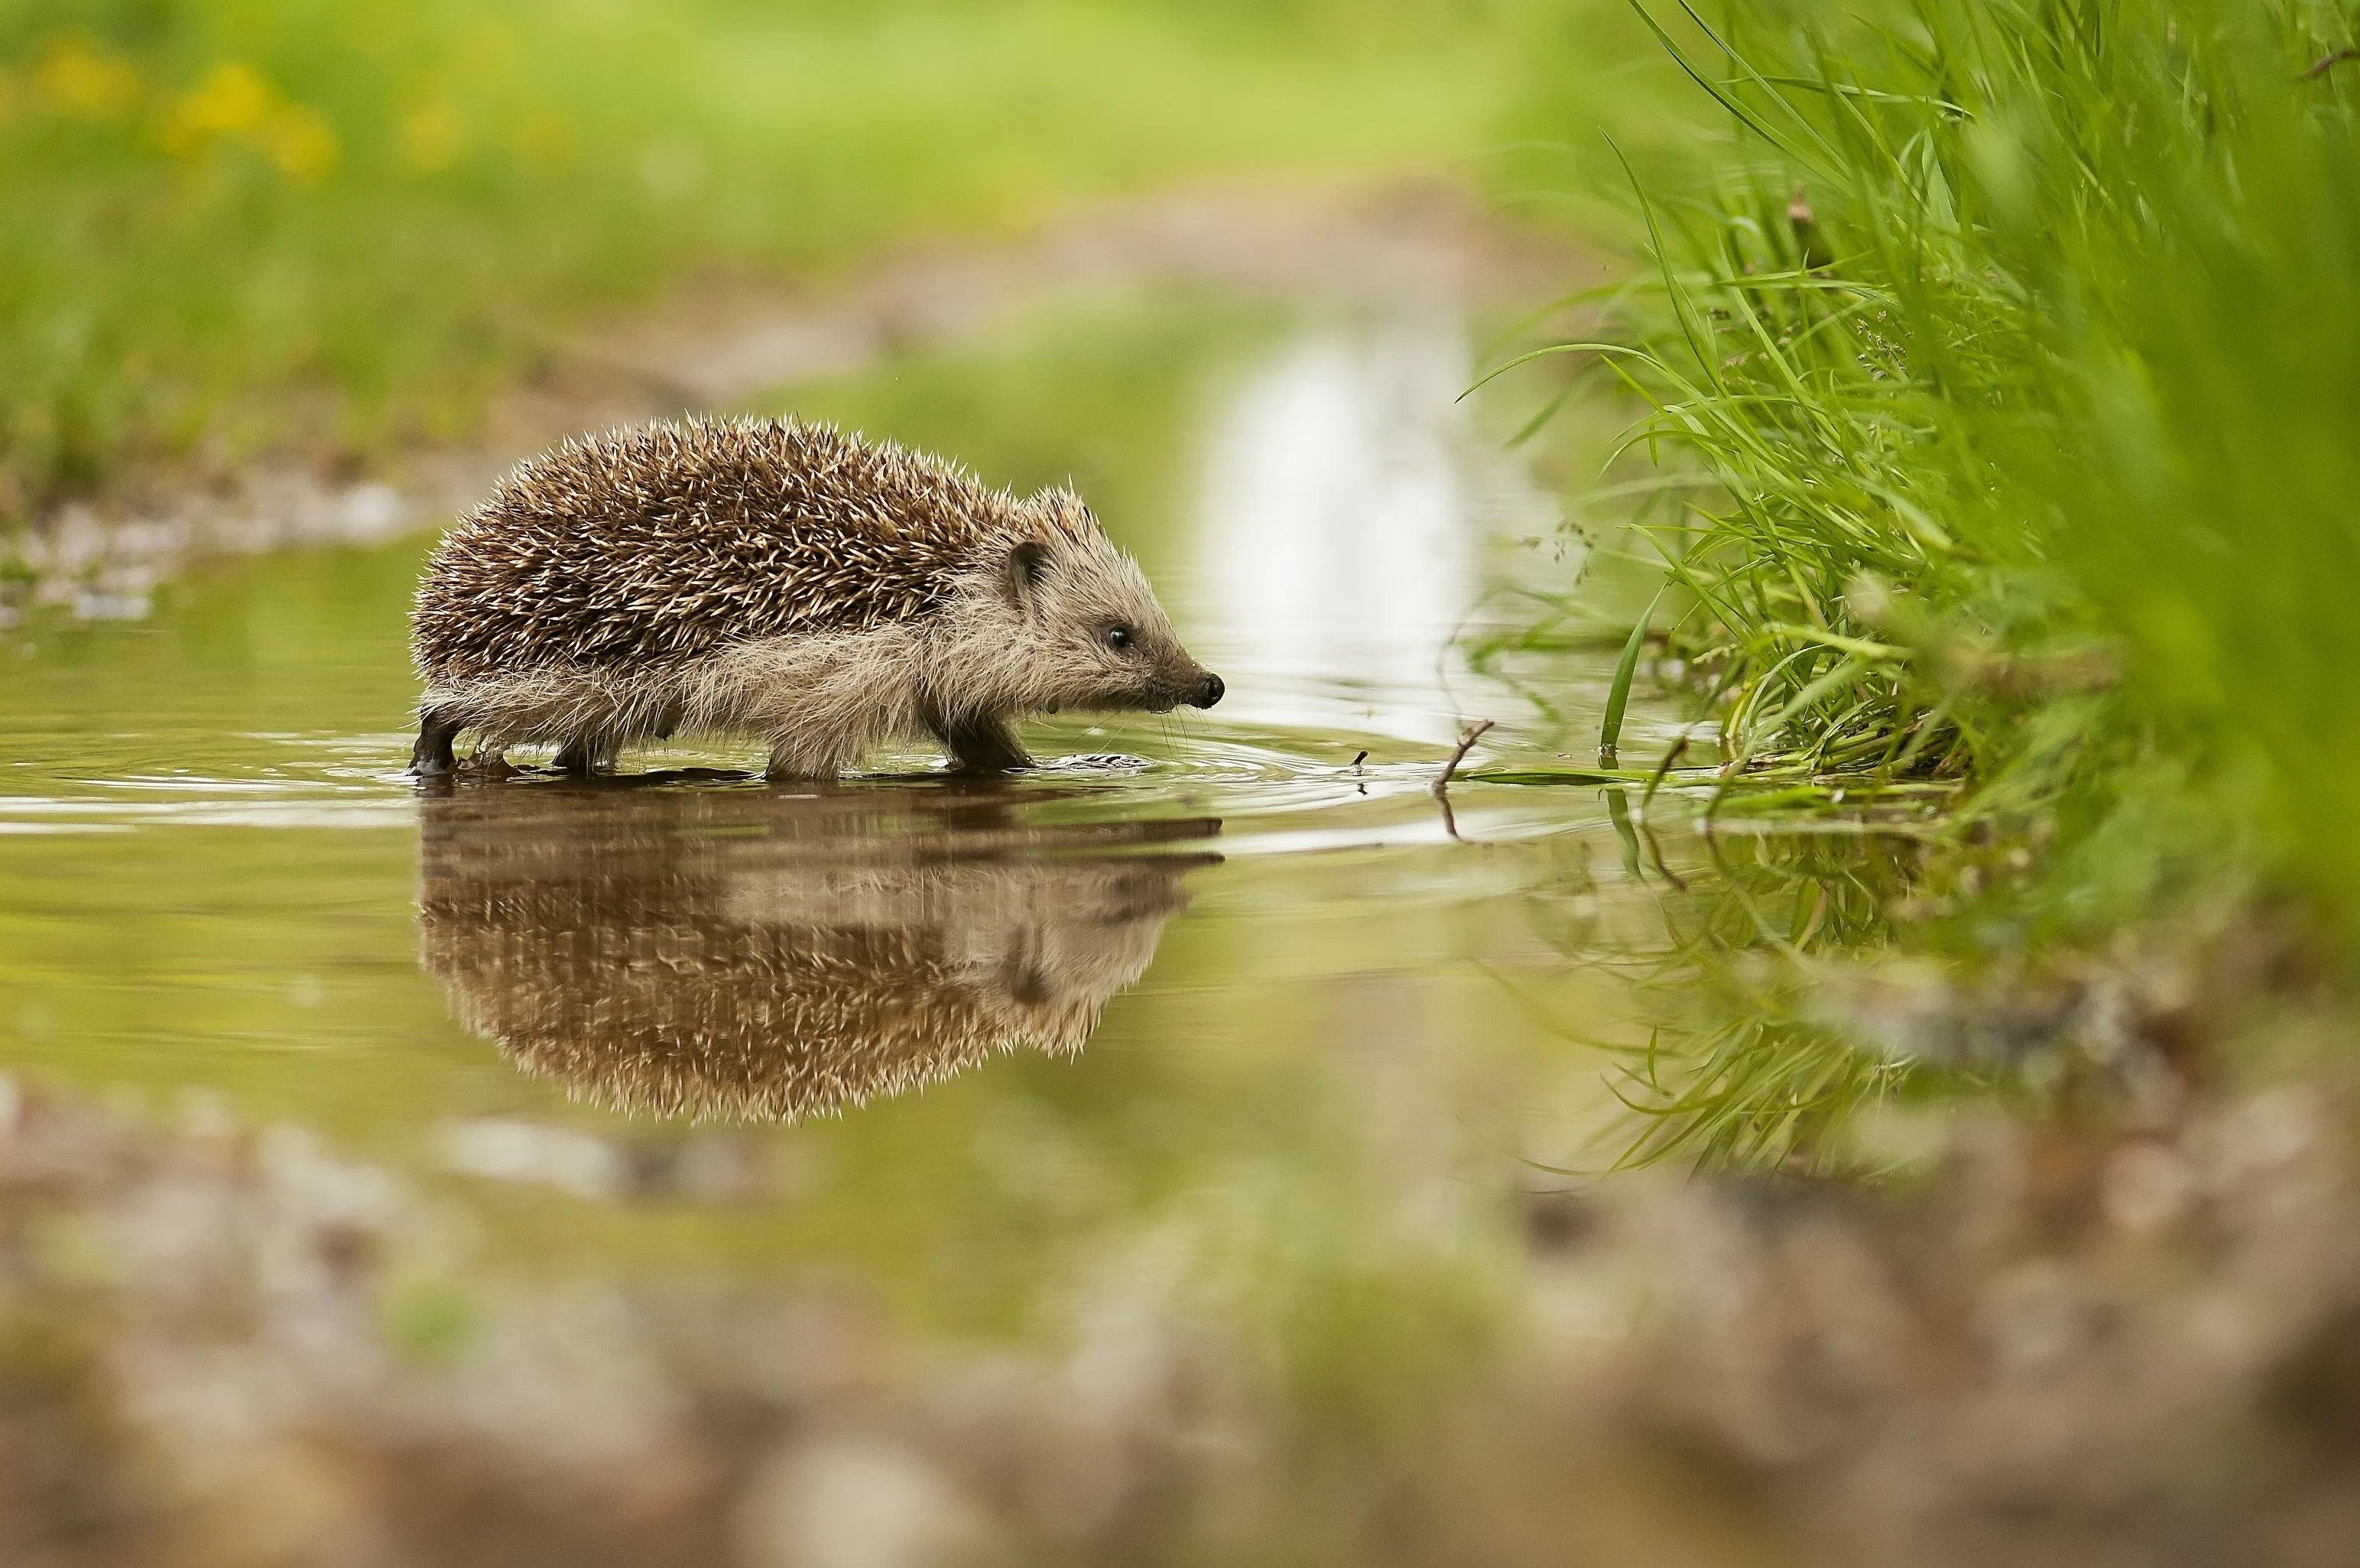 A Hedgehog walking through a puddle in a field.